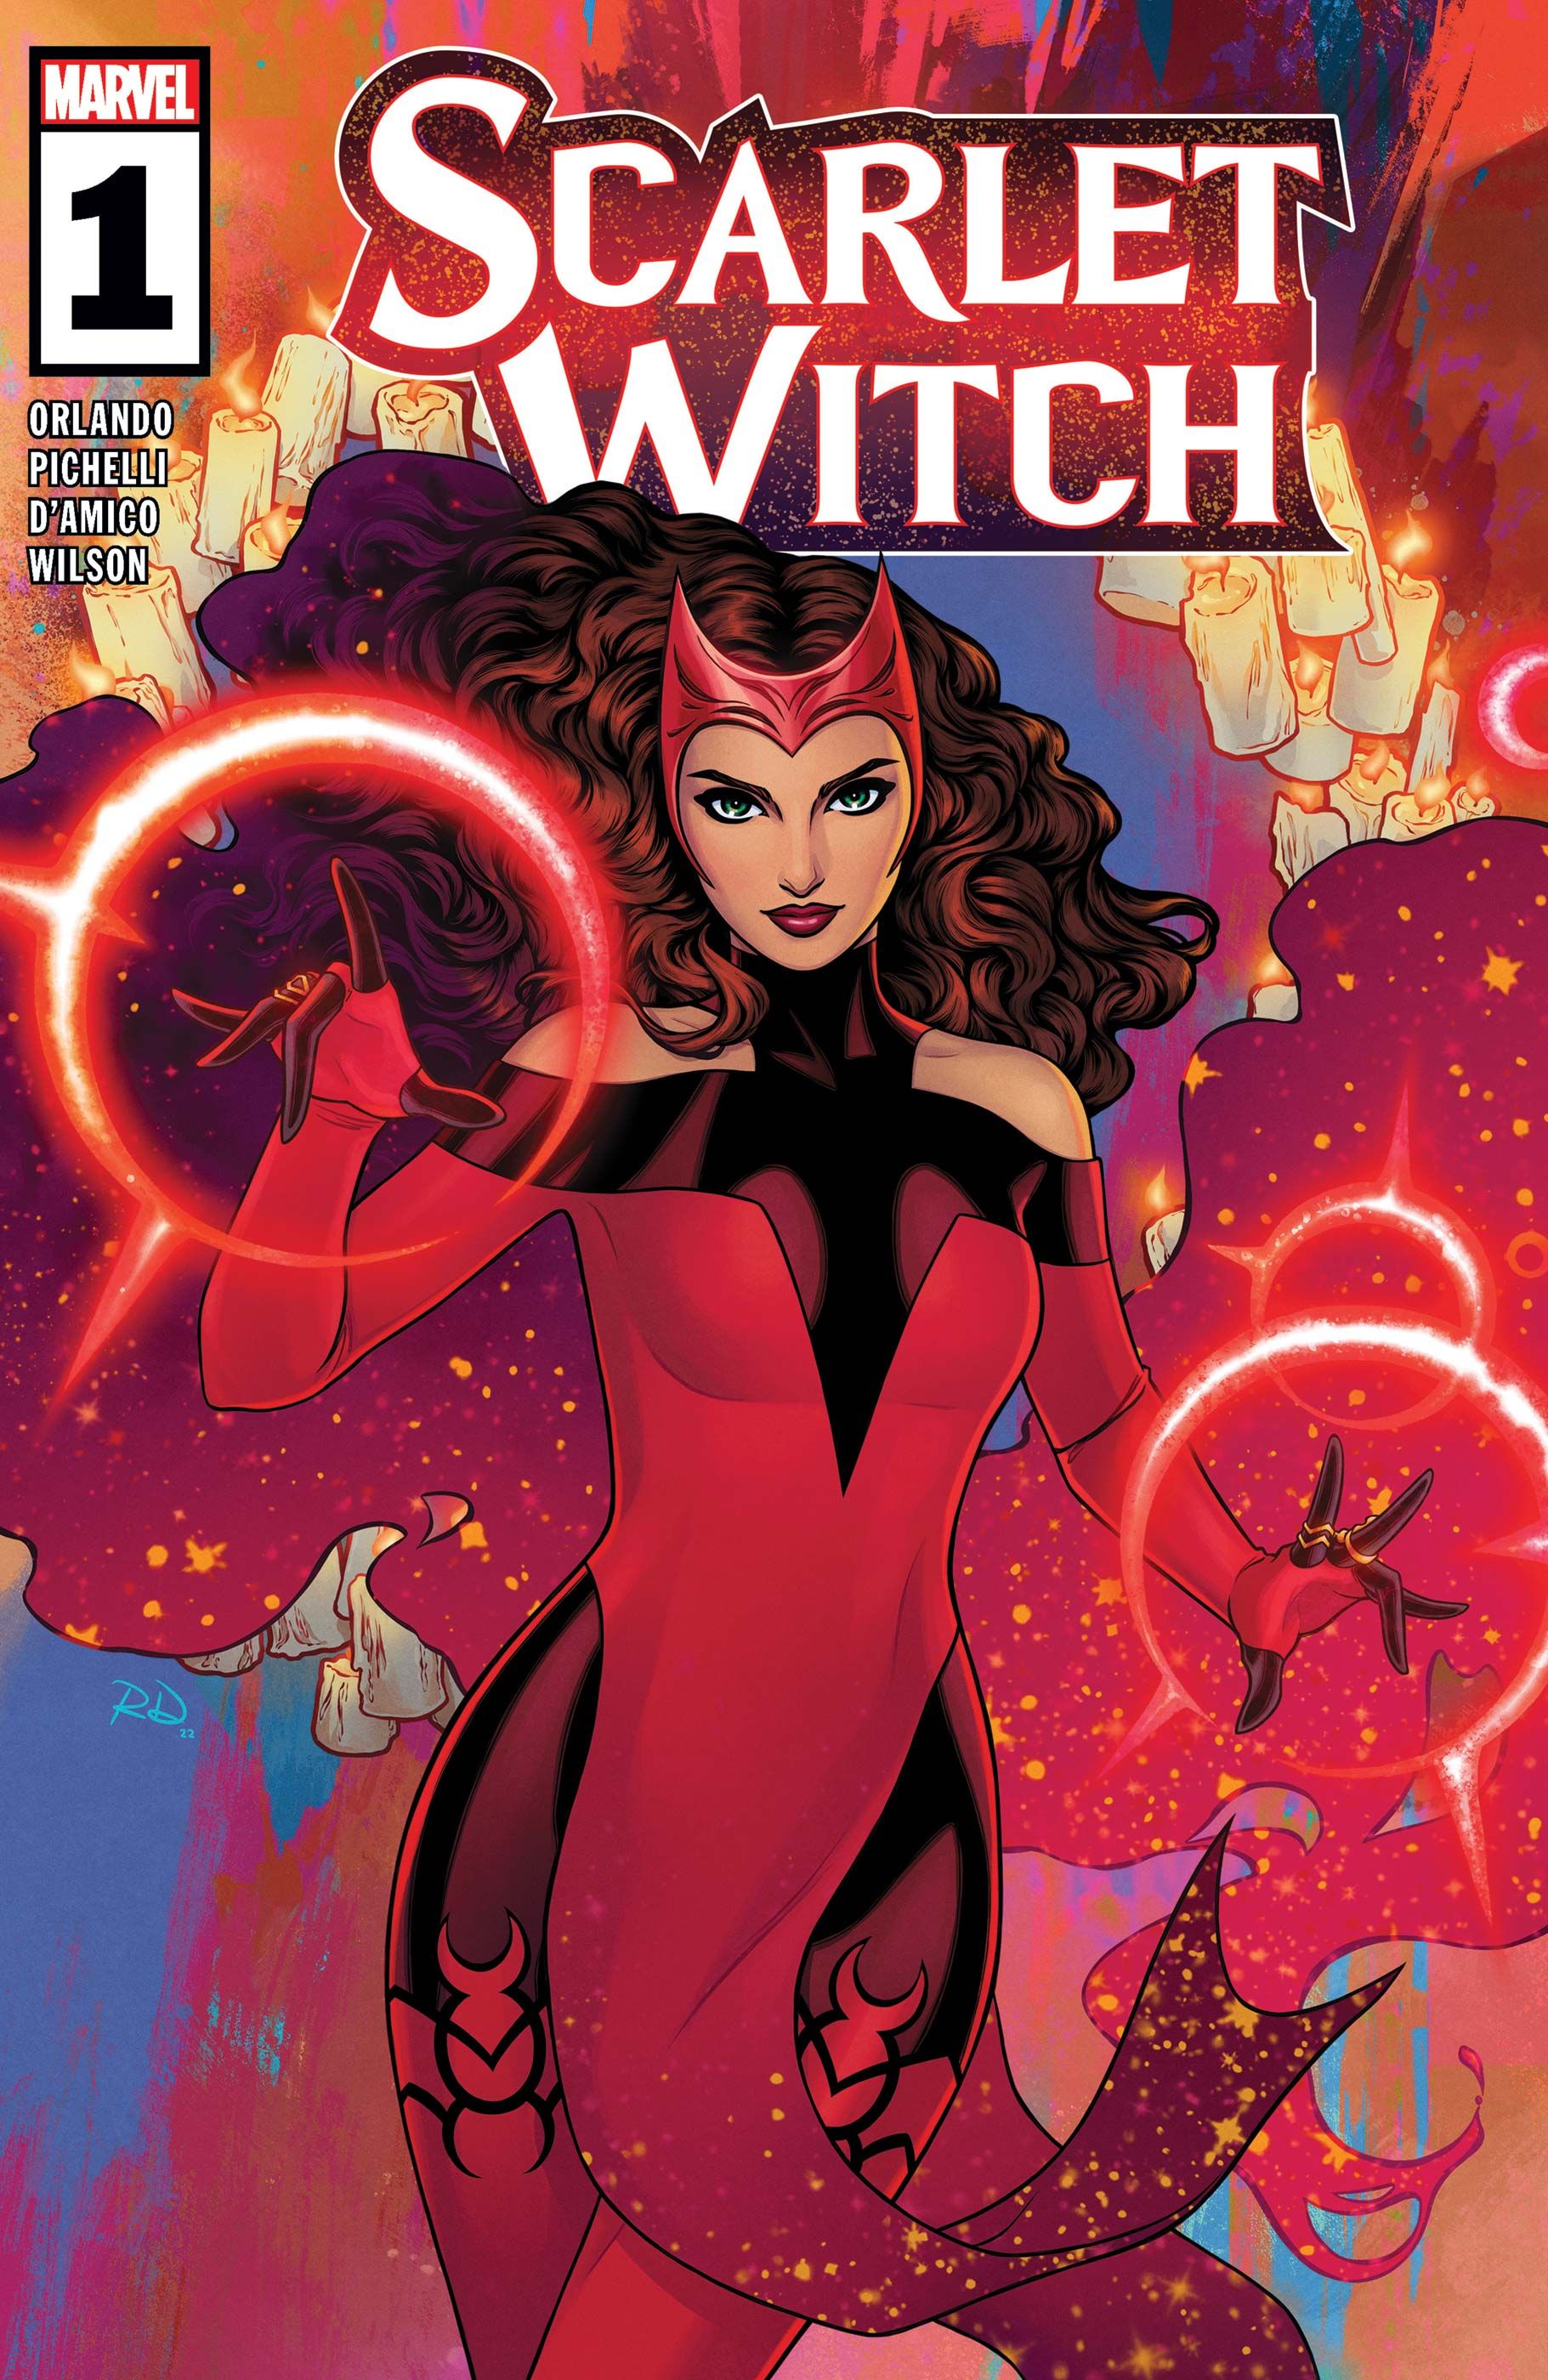 Wanda Maximoff S New Solo Series Is Off To A Great Start In Marvel S Scarlet Witch 1